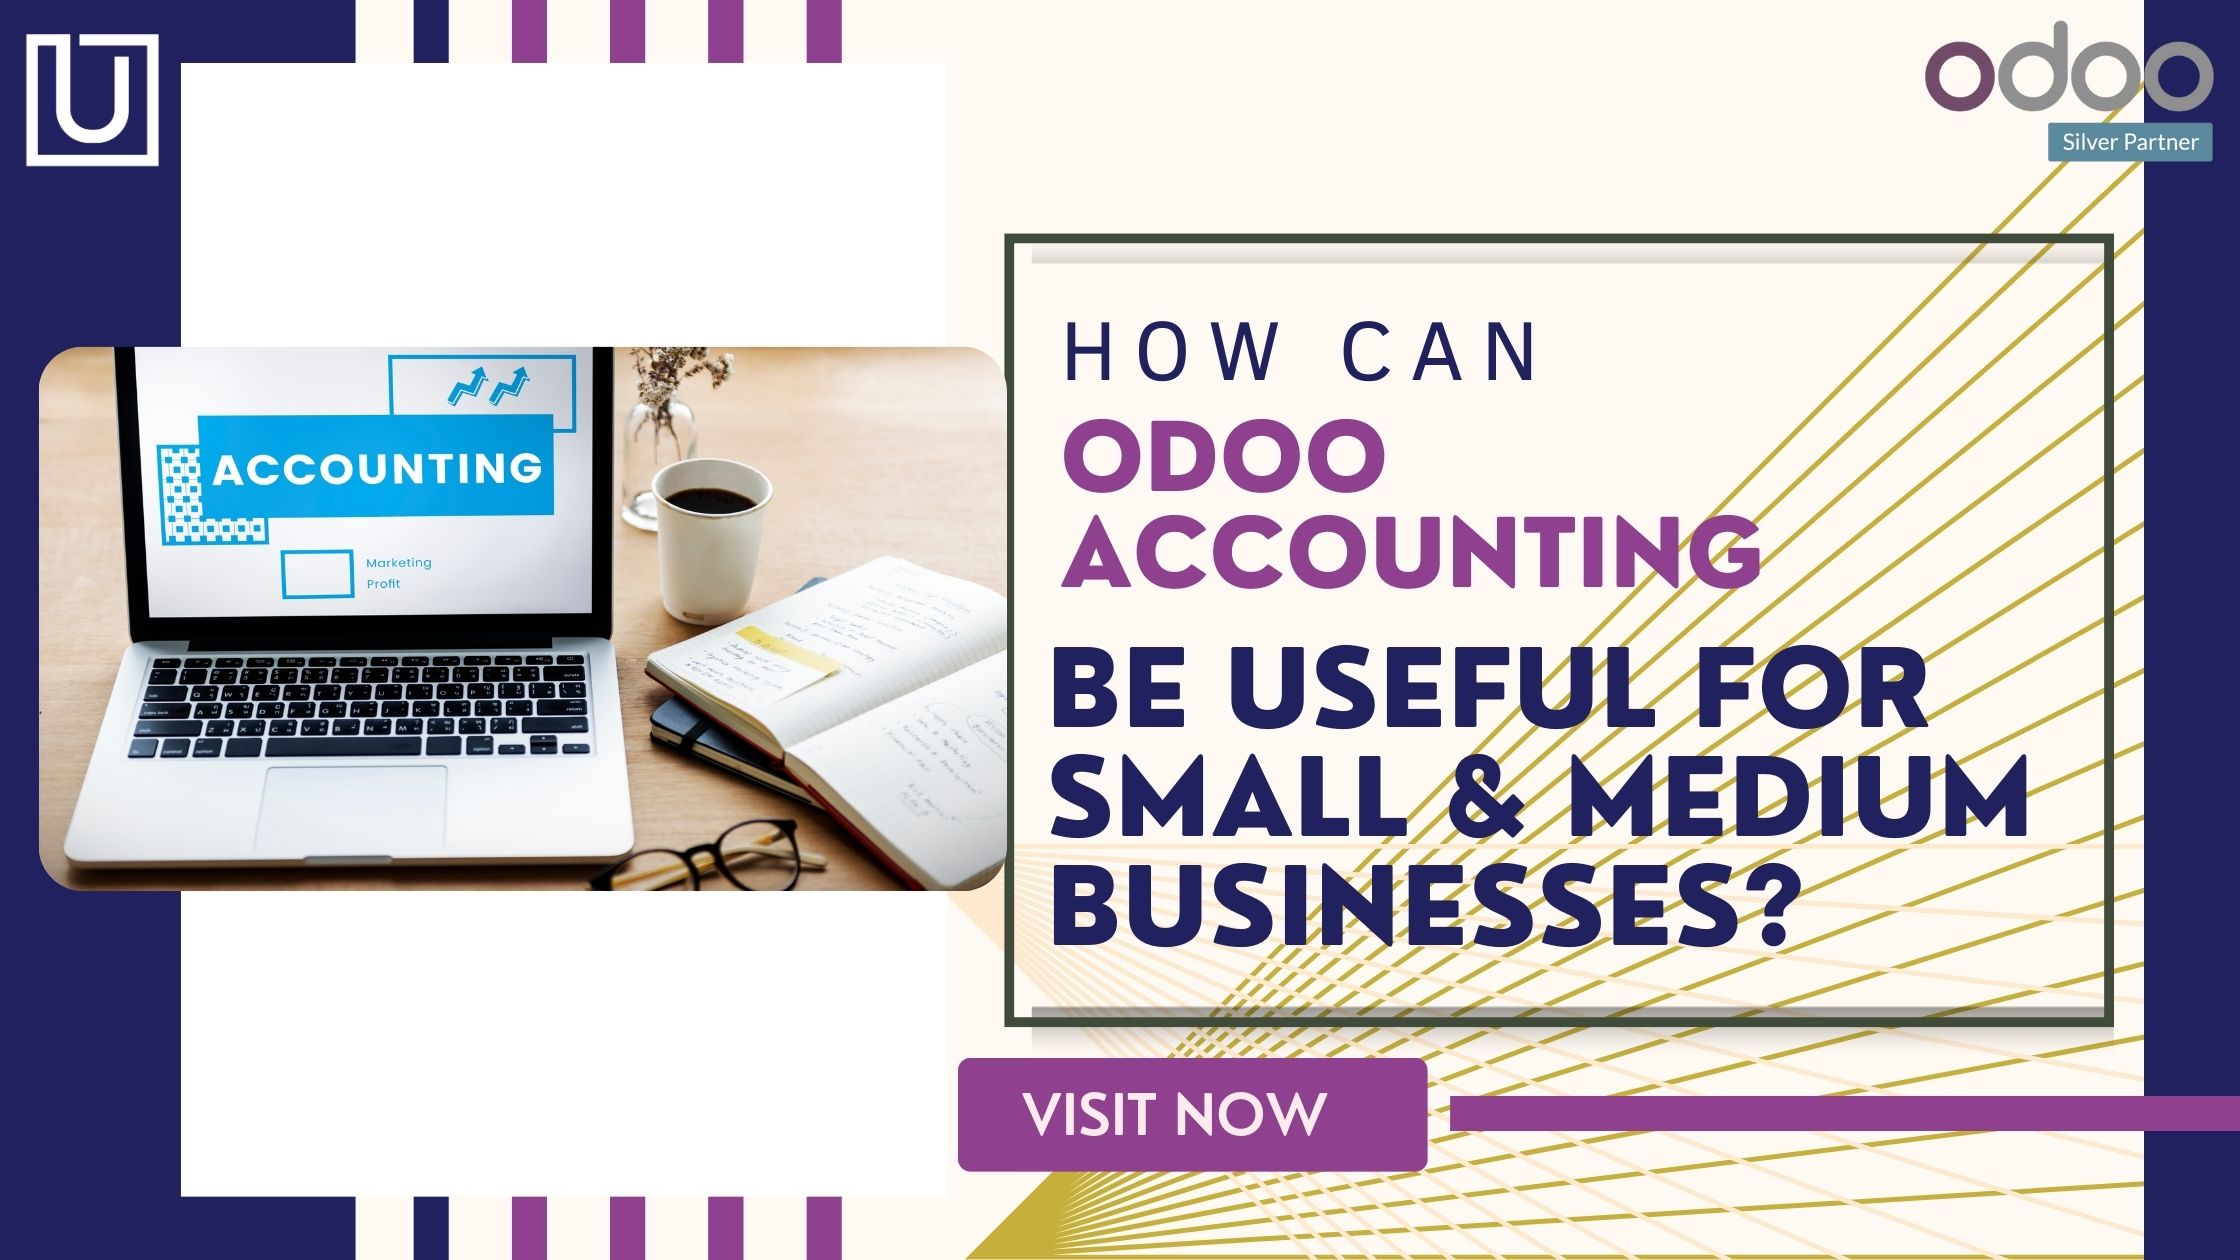 How can Odoo Accounting be useful for small & medium businesses?